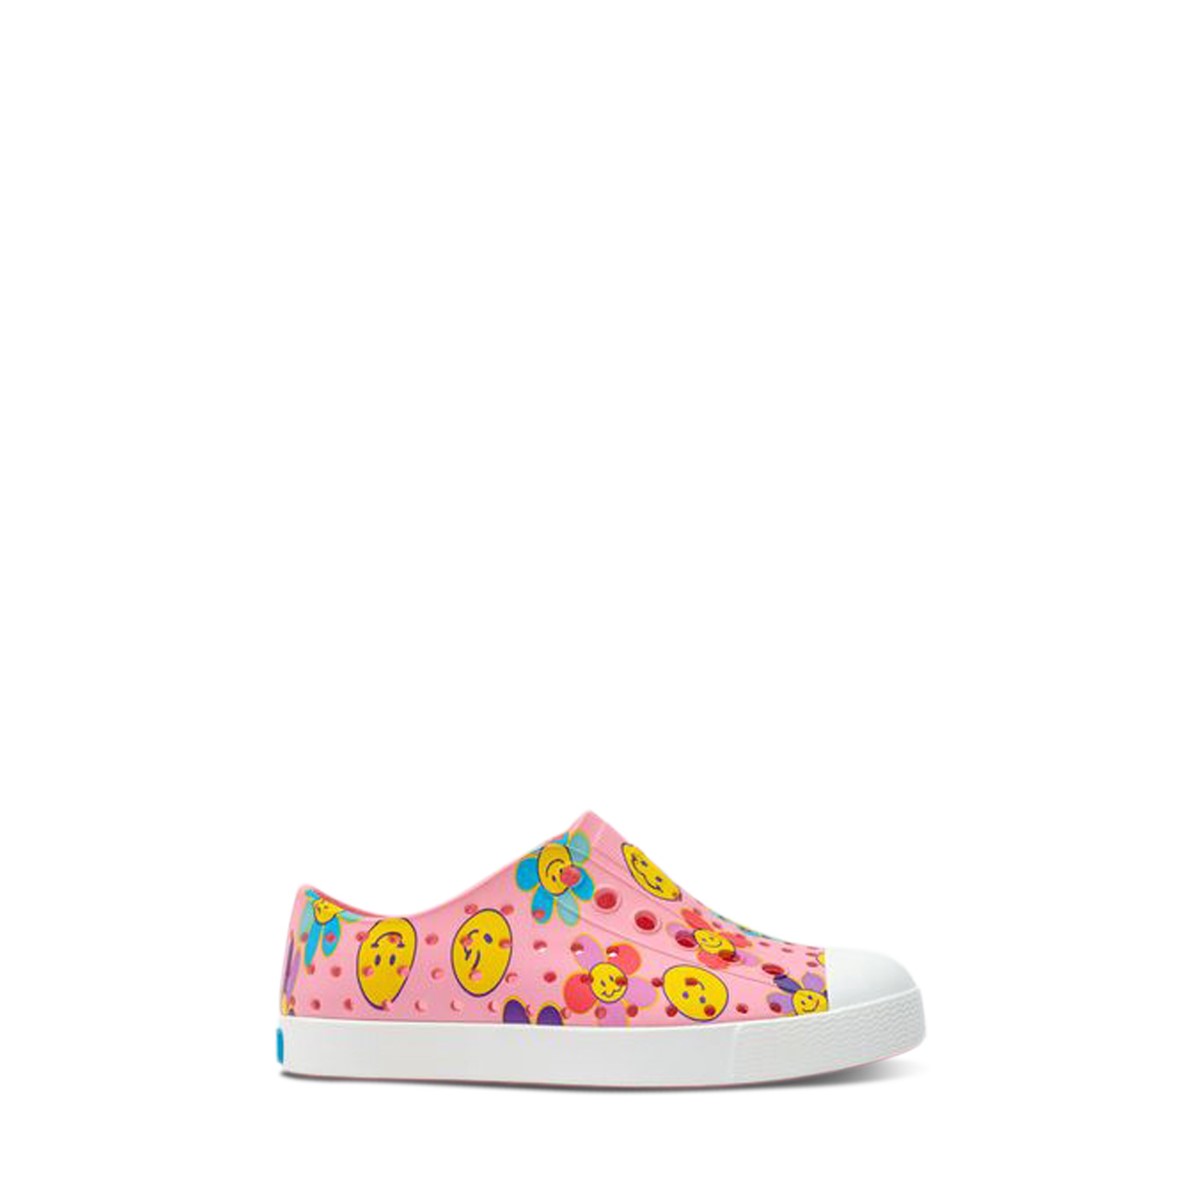 Toddler's Jefferson Sugarlite Slip-On Shoes in Pink/Yellow